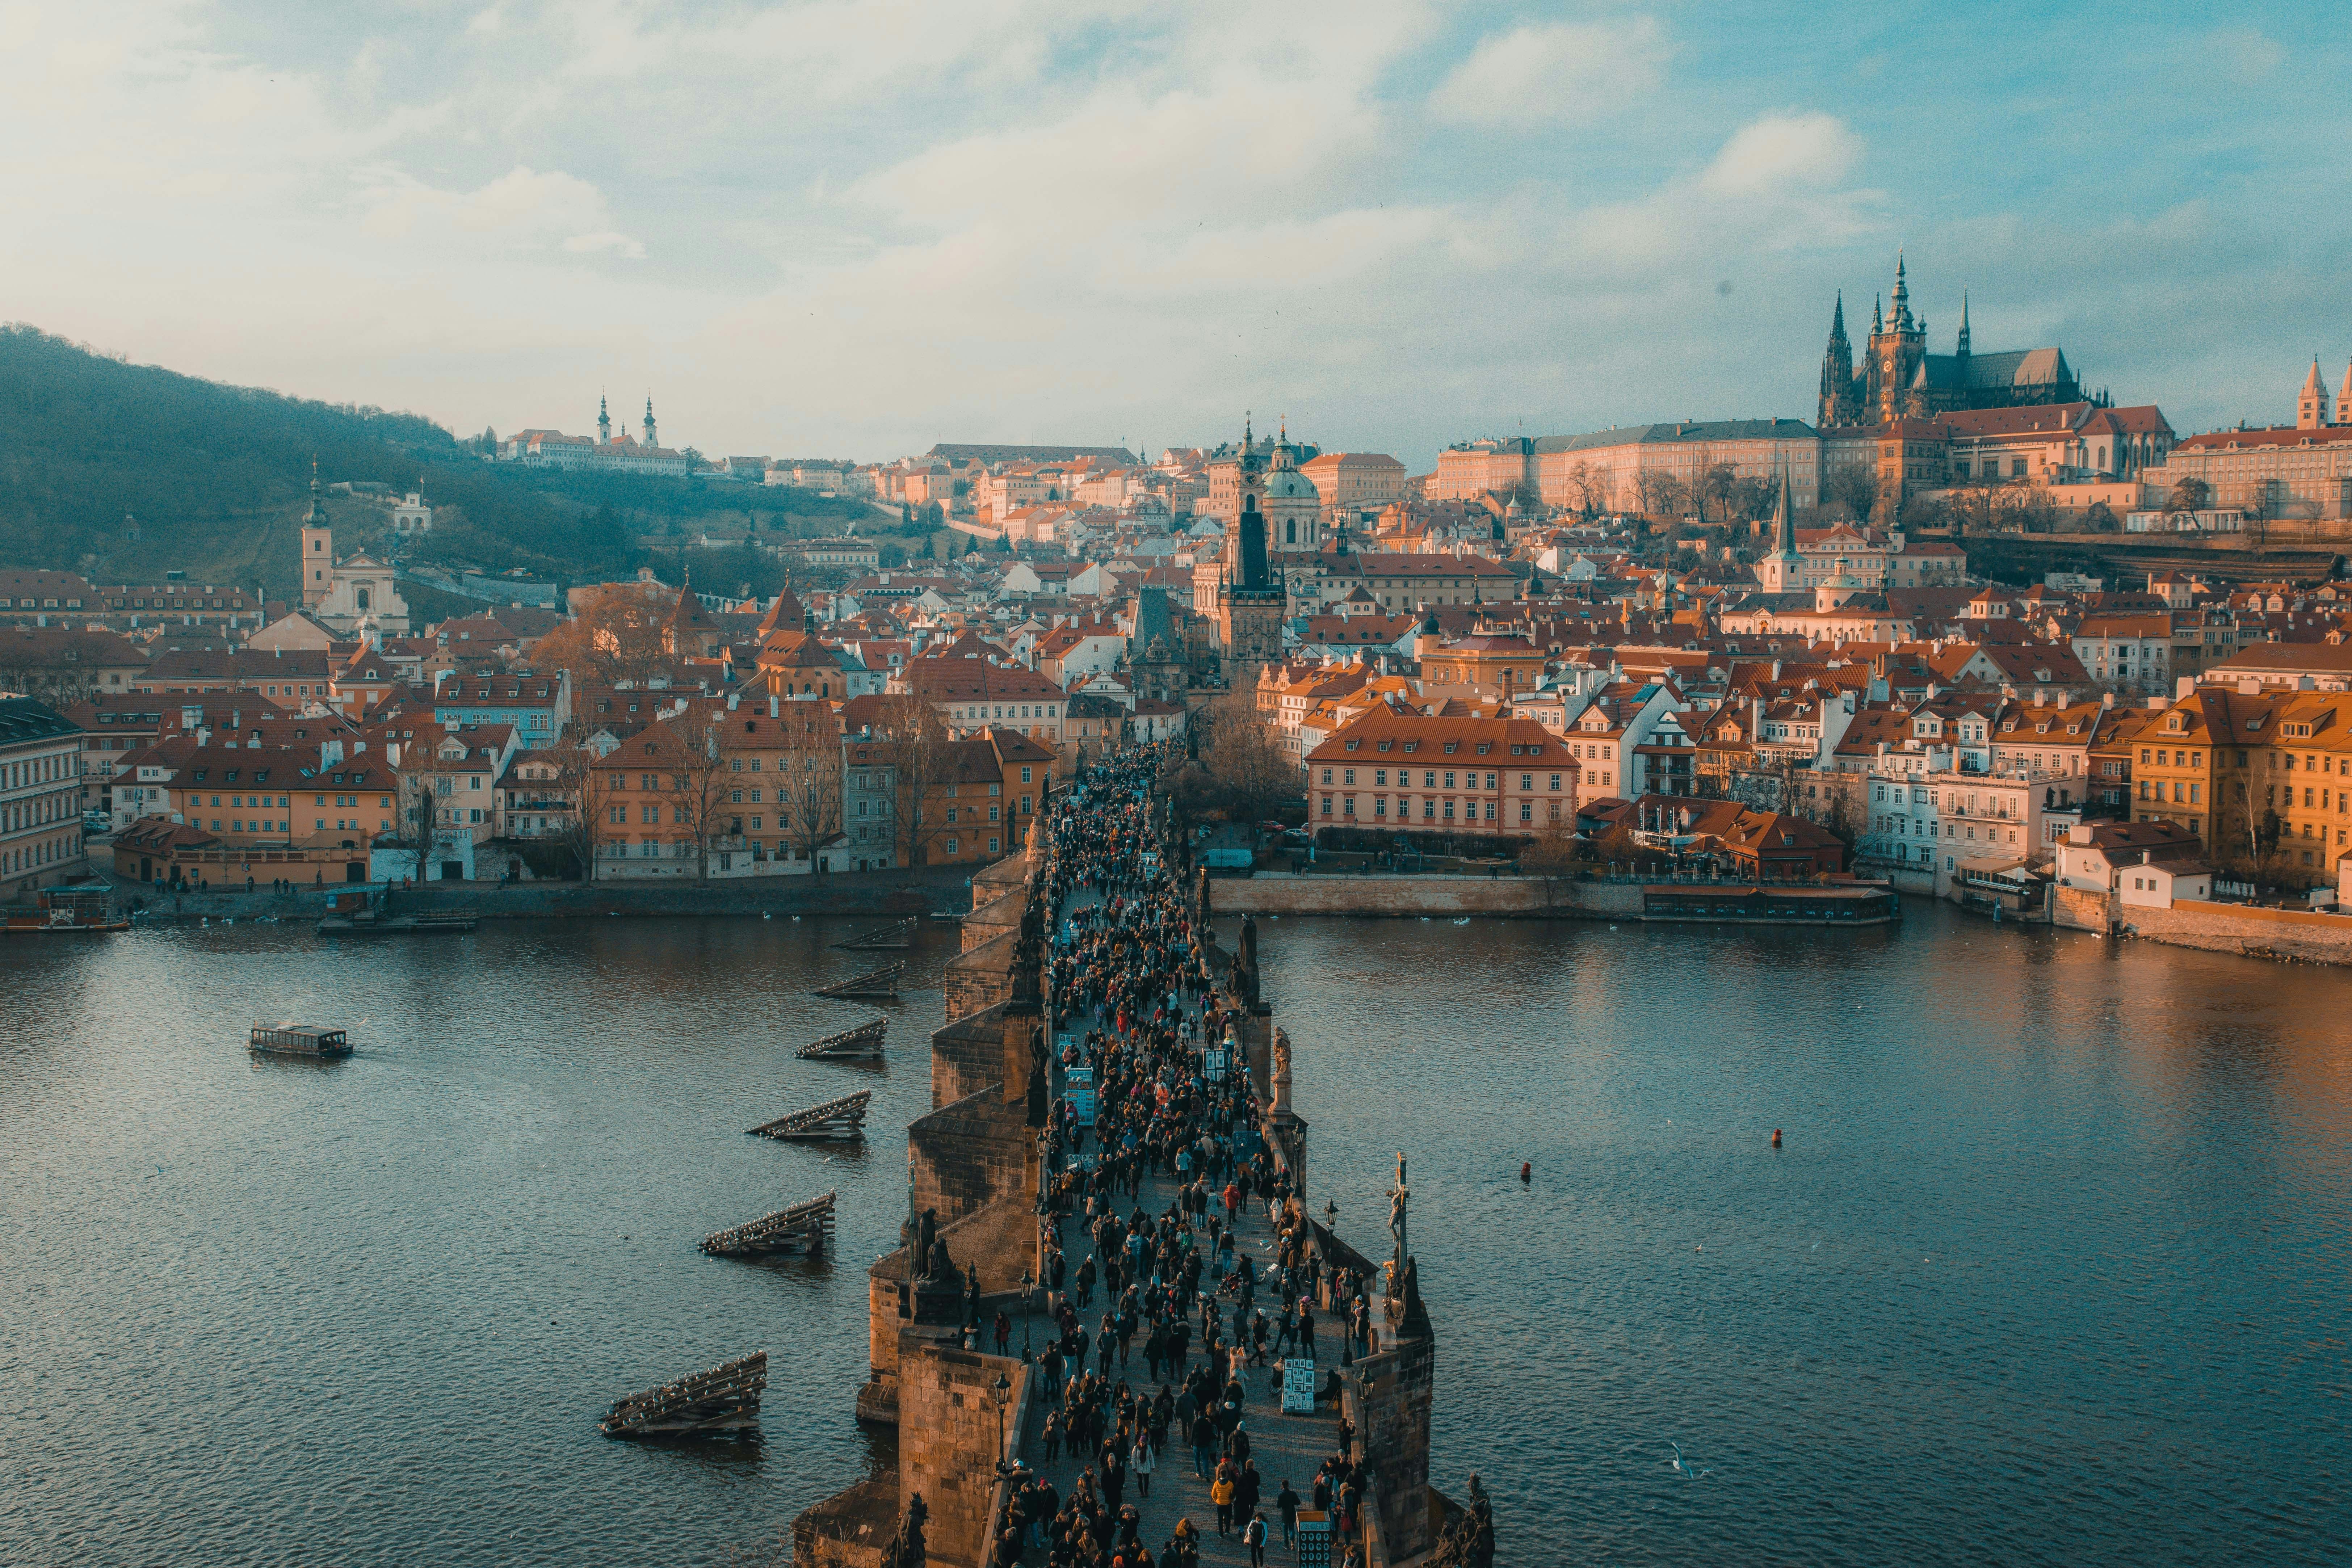 Prague is known as the City of a Hundred Spires